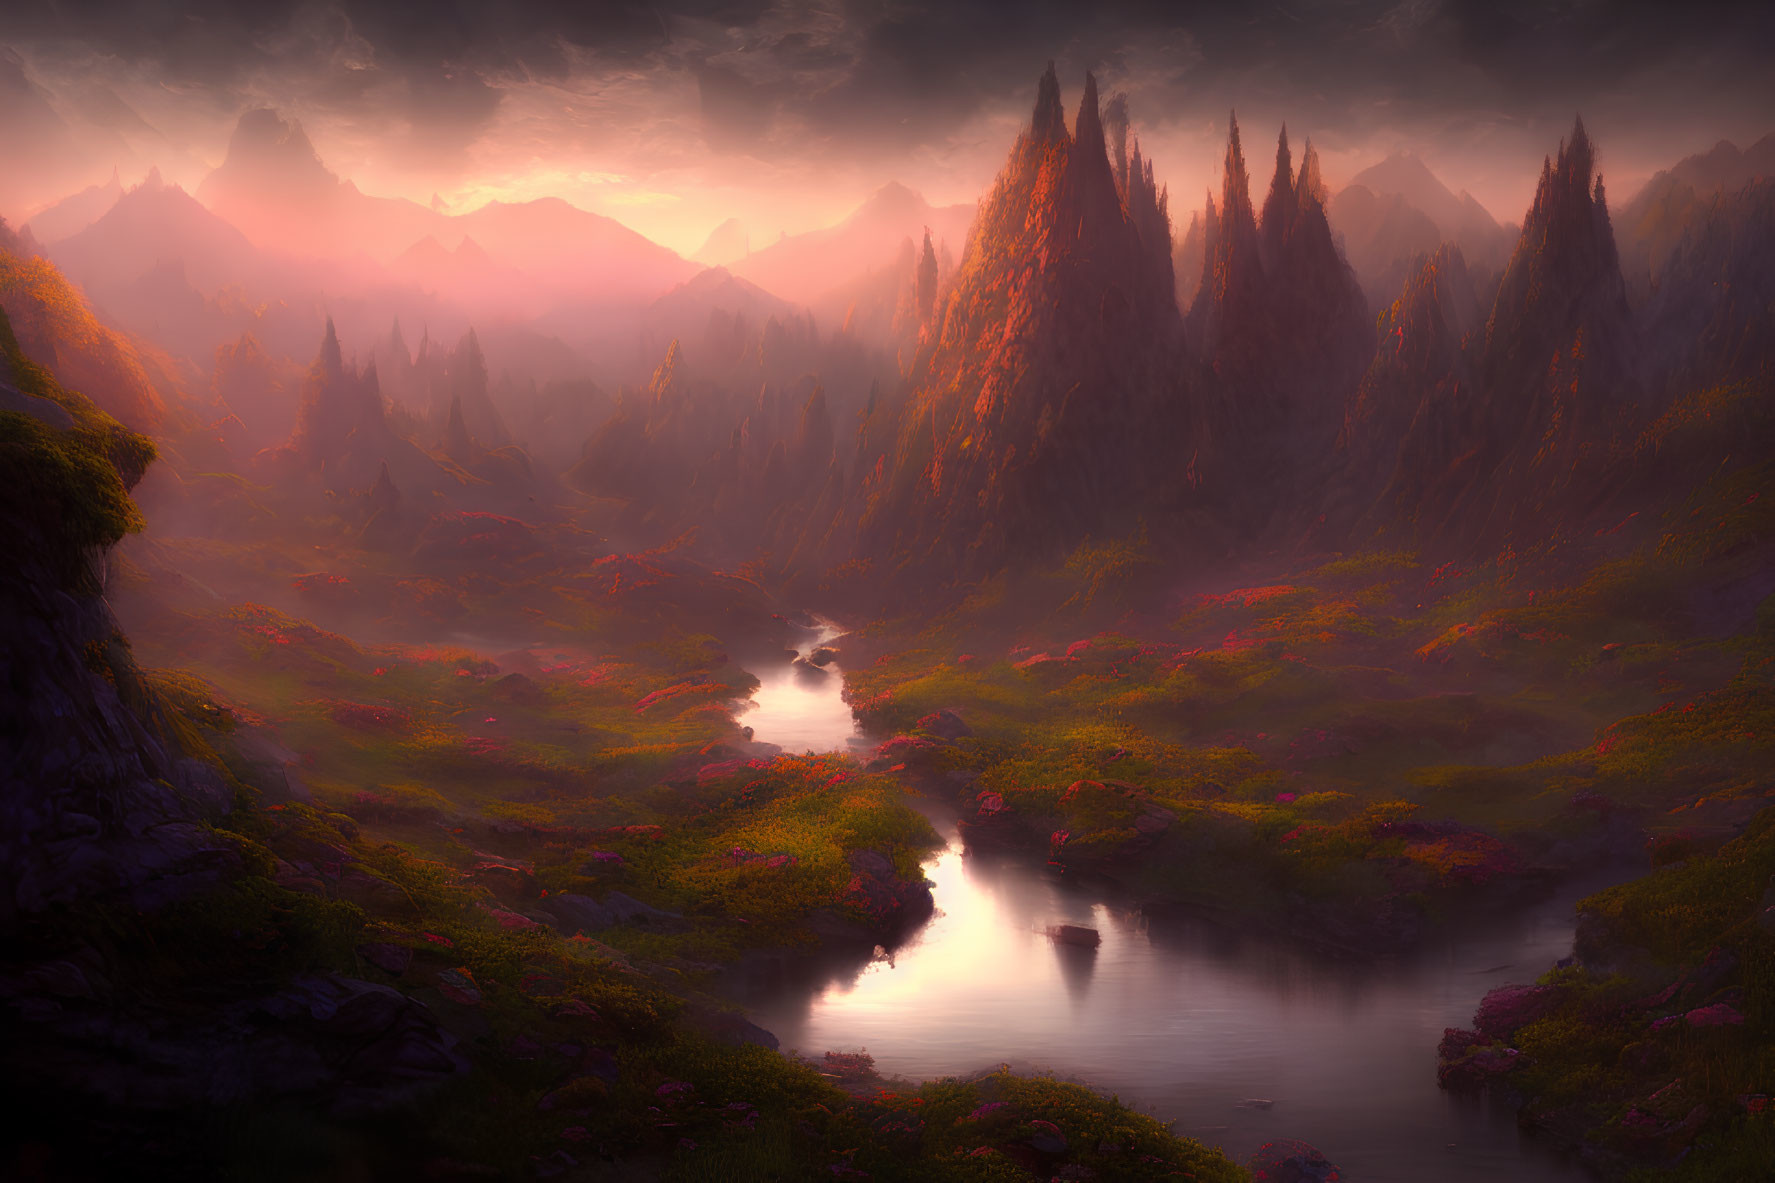 Vibrant pink and orange sunset over mystical landscape with spire-like mountains, winding river, and